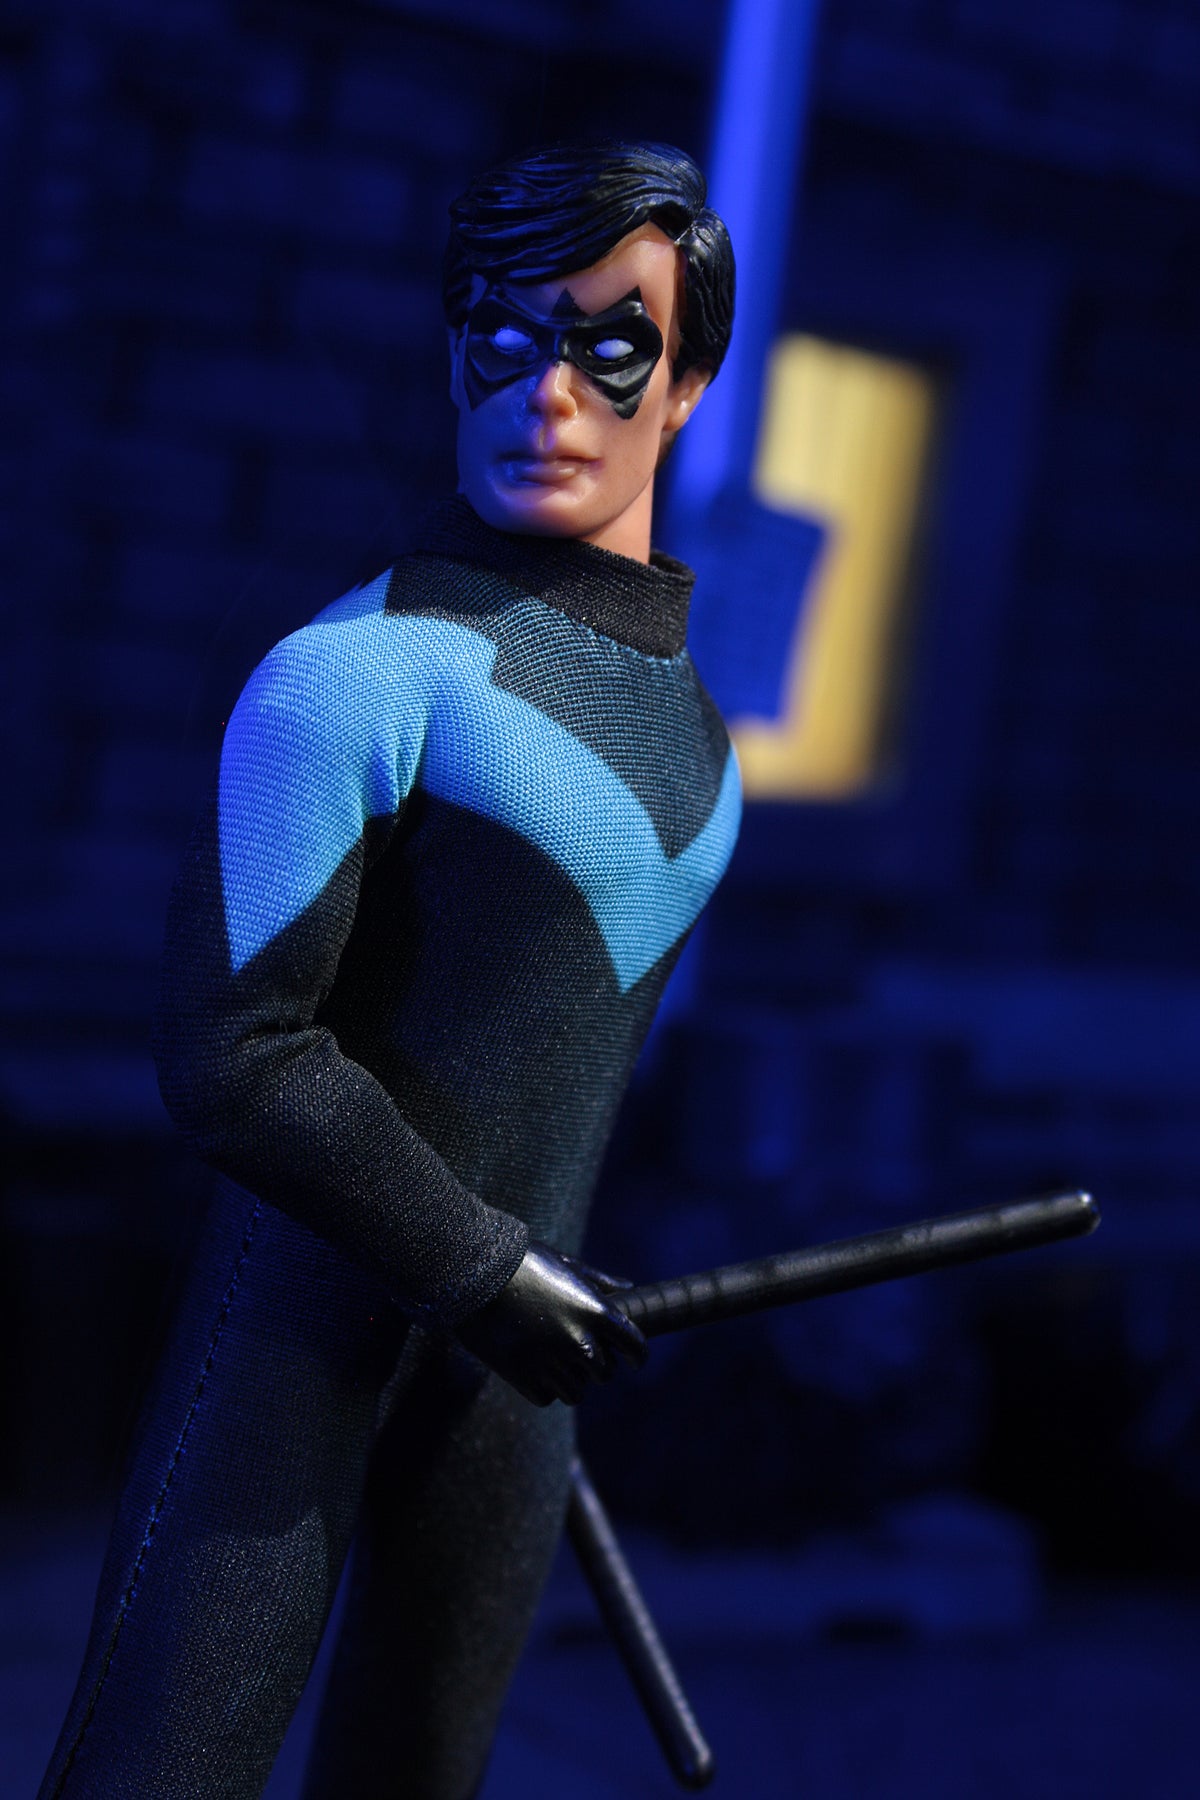 Mego Wave 18 - Nightwing 50th Anniversary World's Greatest Superheroes 8" Action Figure